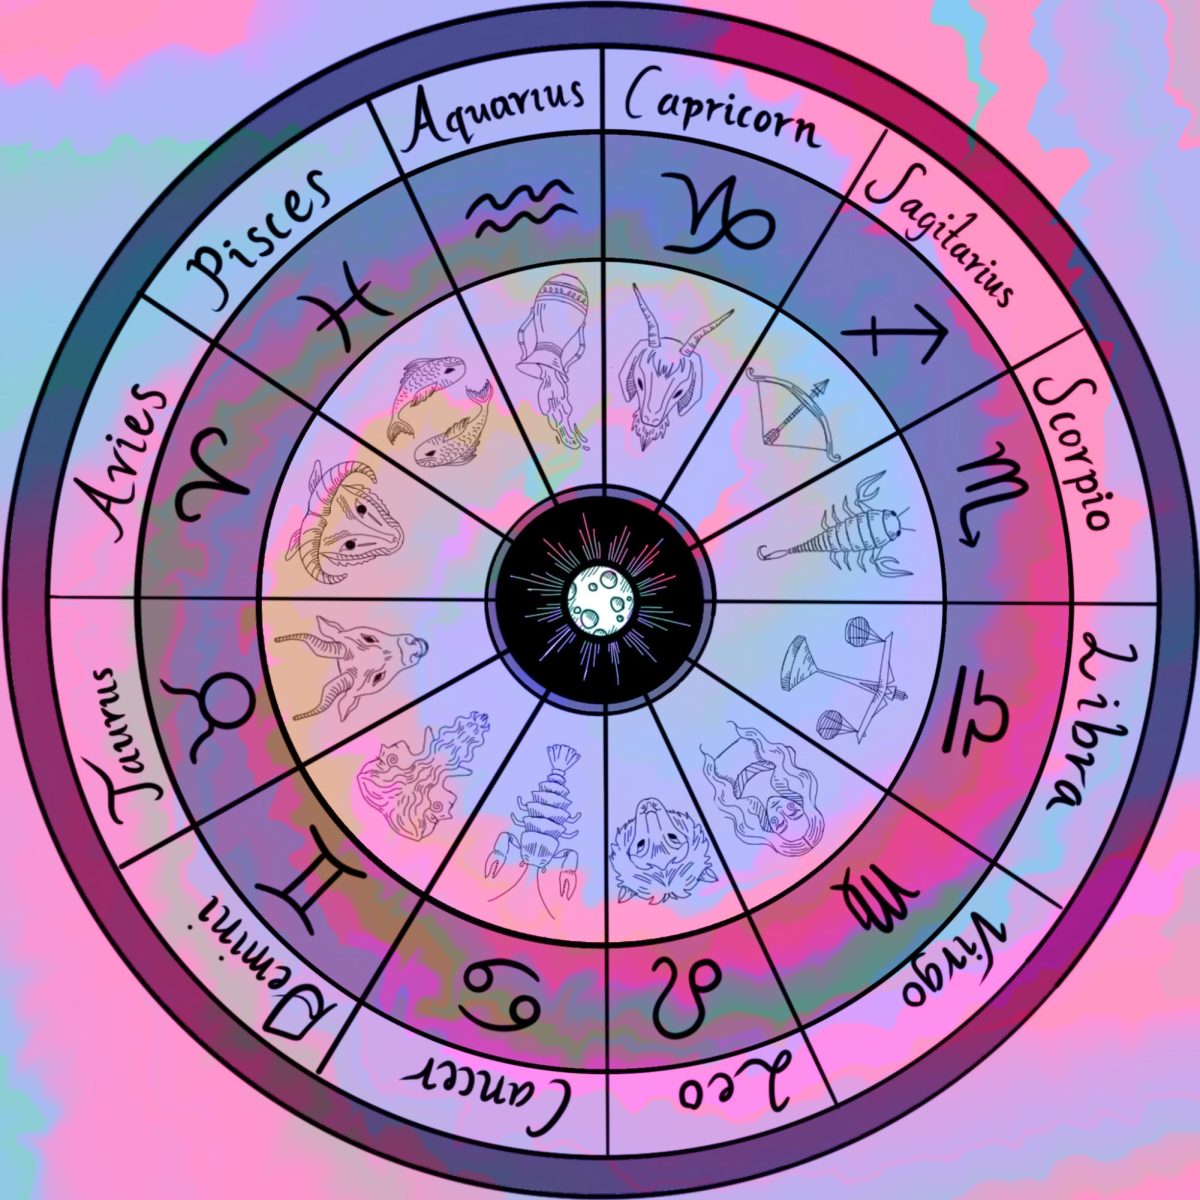 Horoscope: What to add to your living space based on the stars